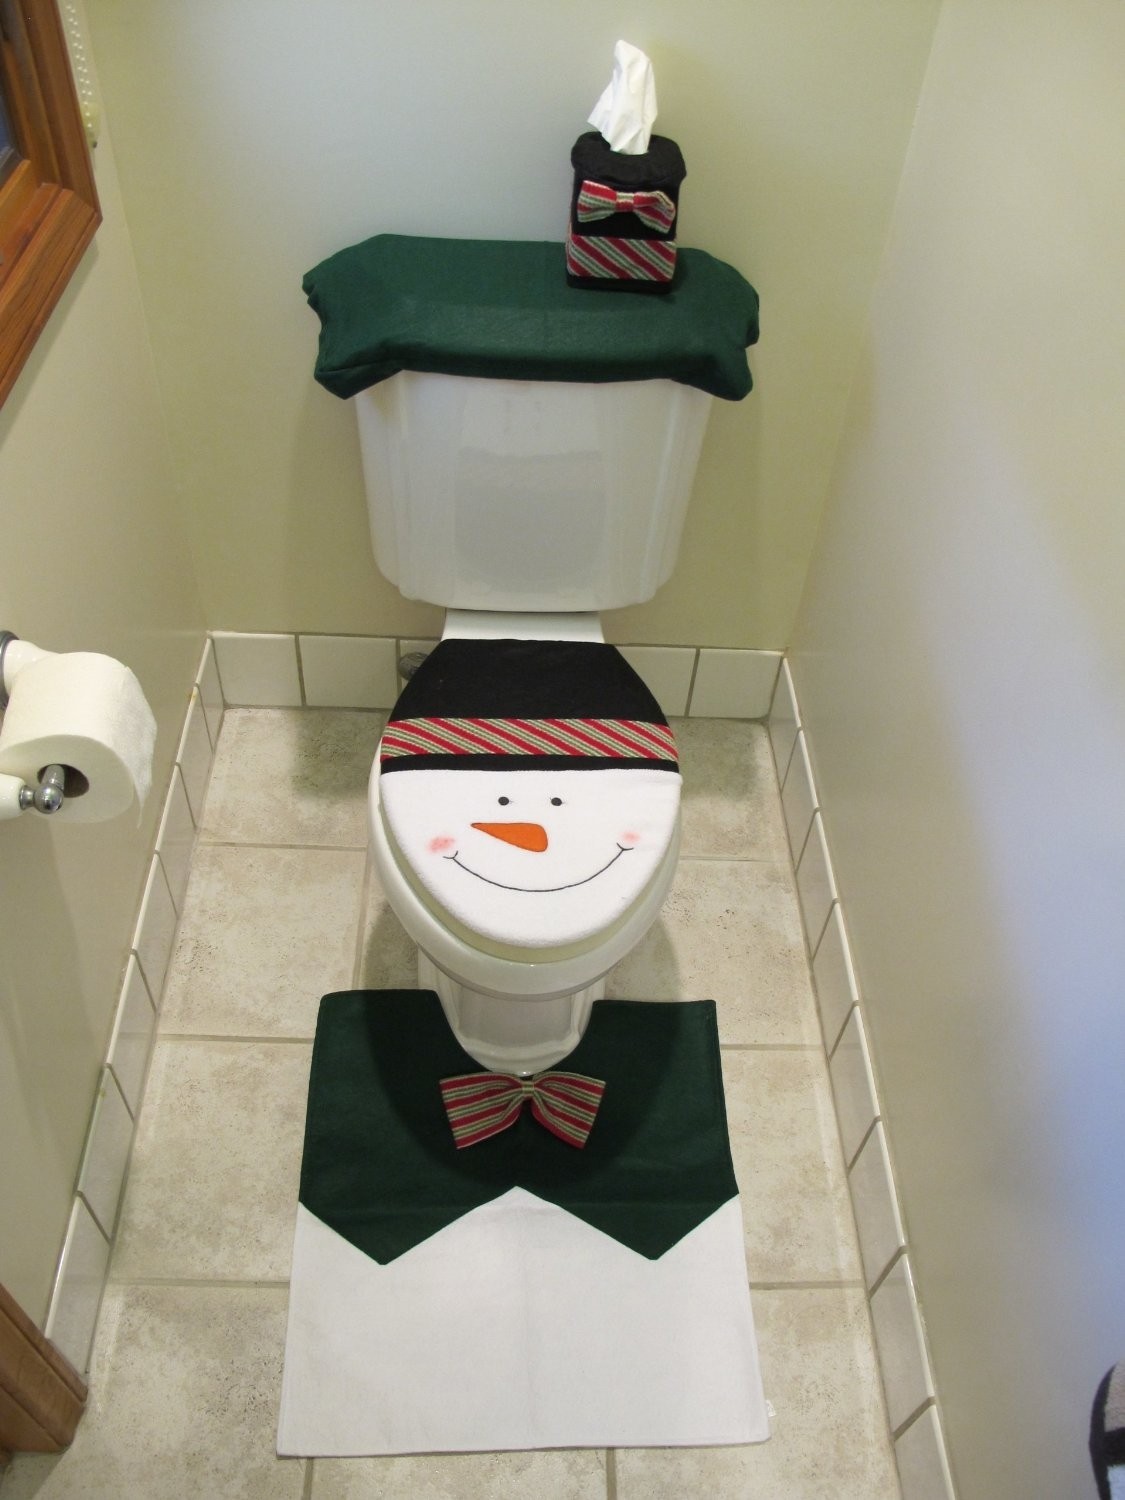 How to make a toilet seat cover